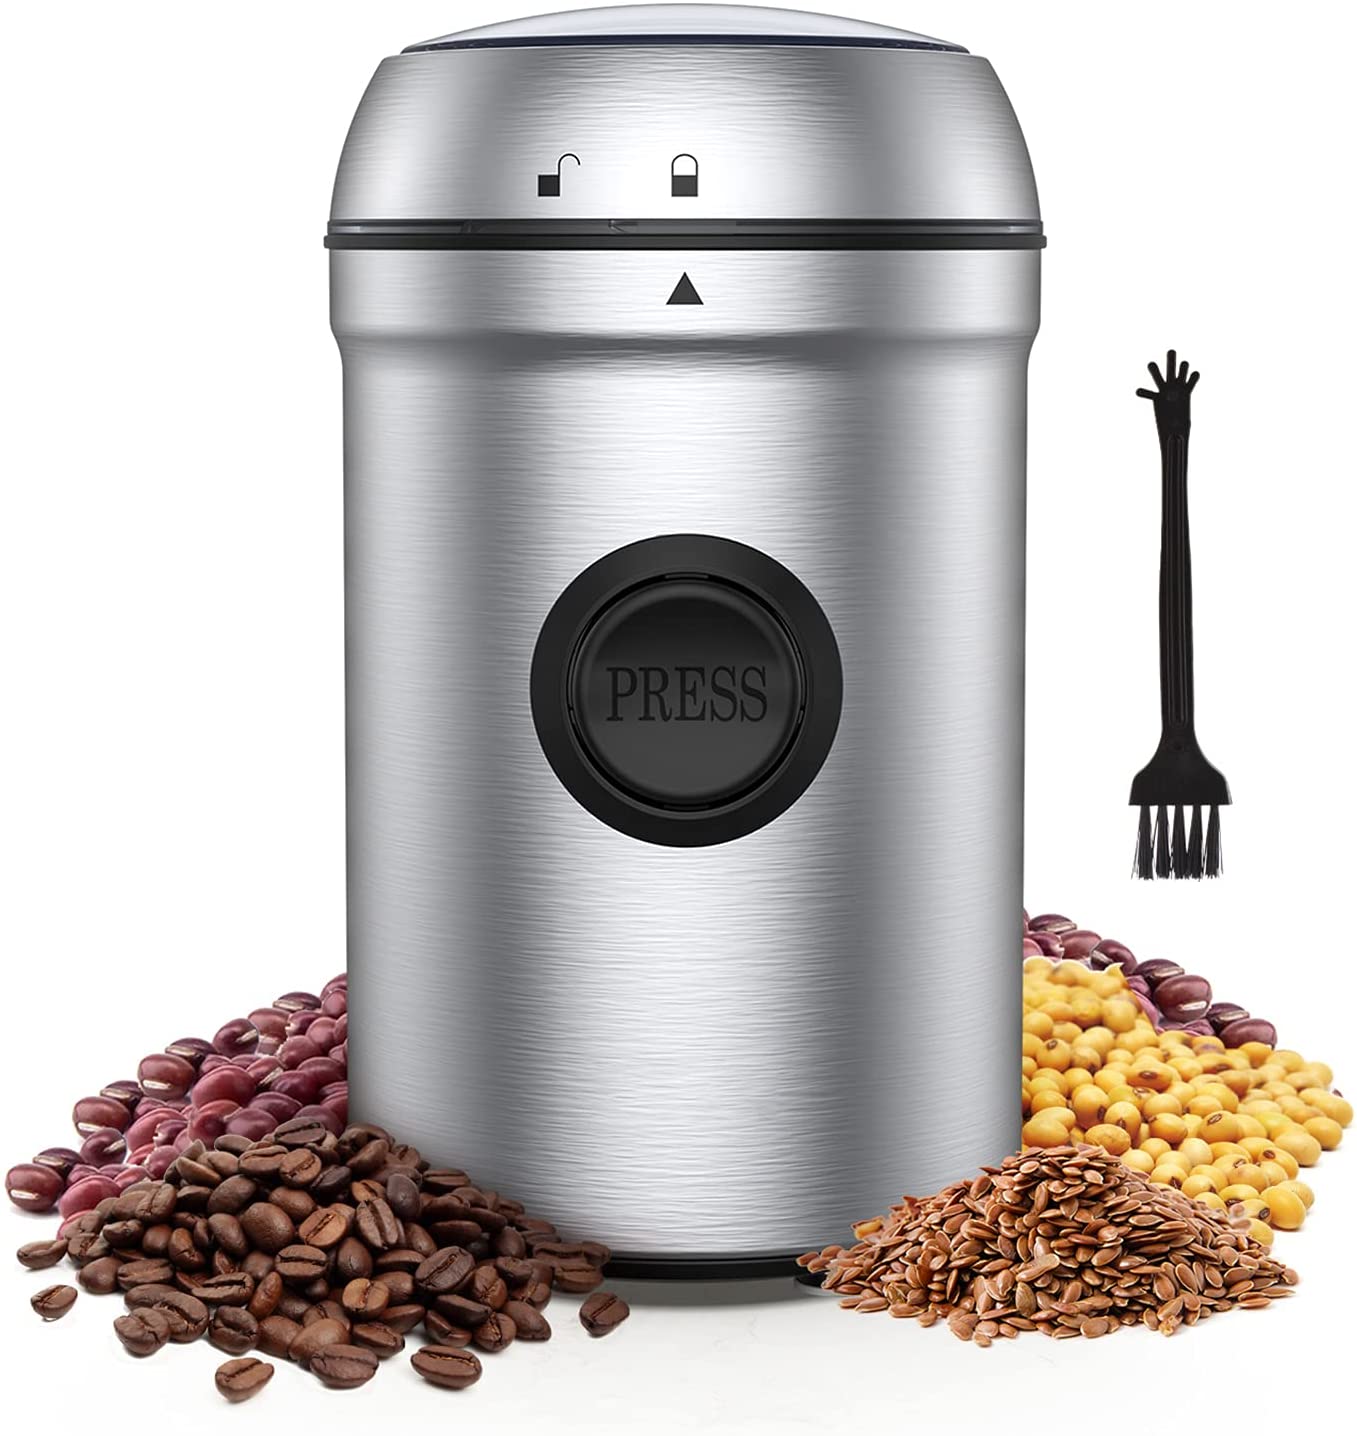 Nouno Electric Coffee Grinder, 80 g Coffee Grinder, 200 W Stainless Steel Mill, 25000 rpm Electric Grain Mill, with 304 Stainless Steel Blades and Cleaning Brush, for Coffee Beans Nuts